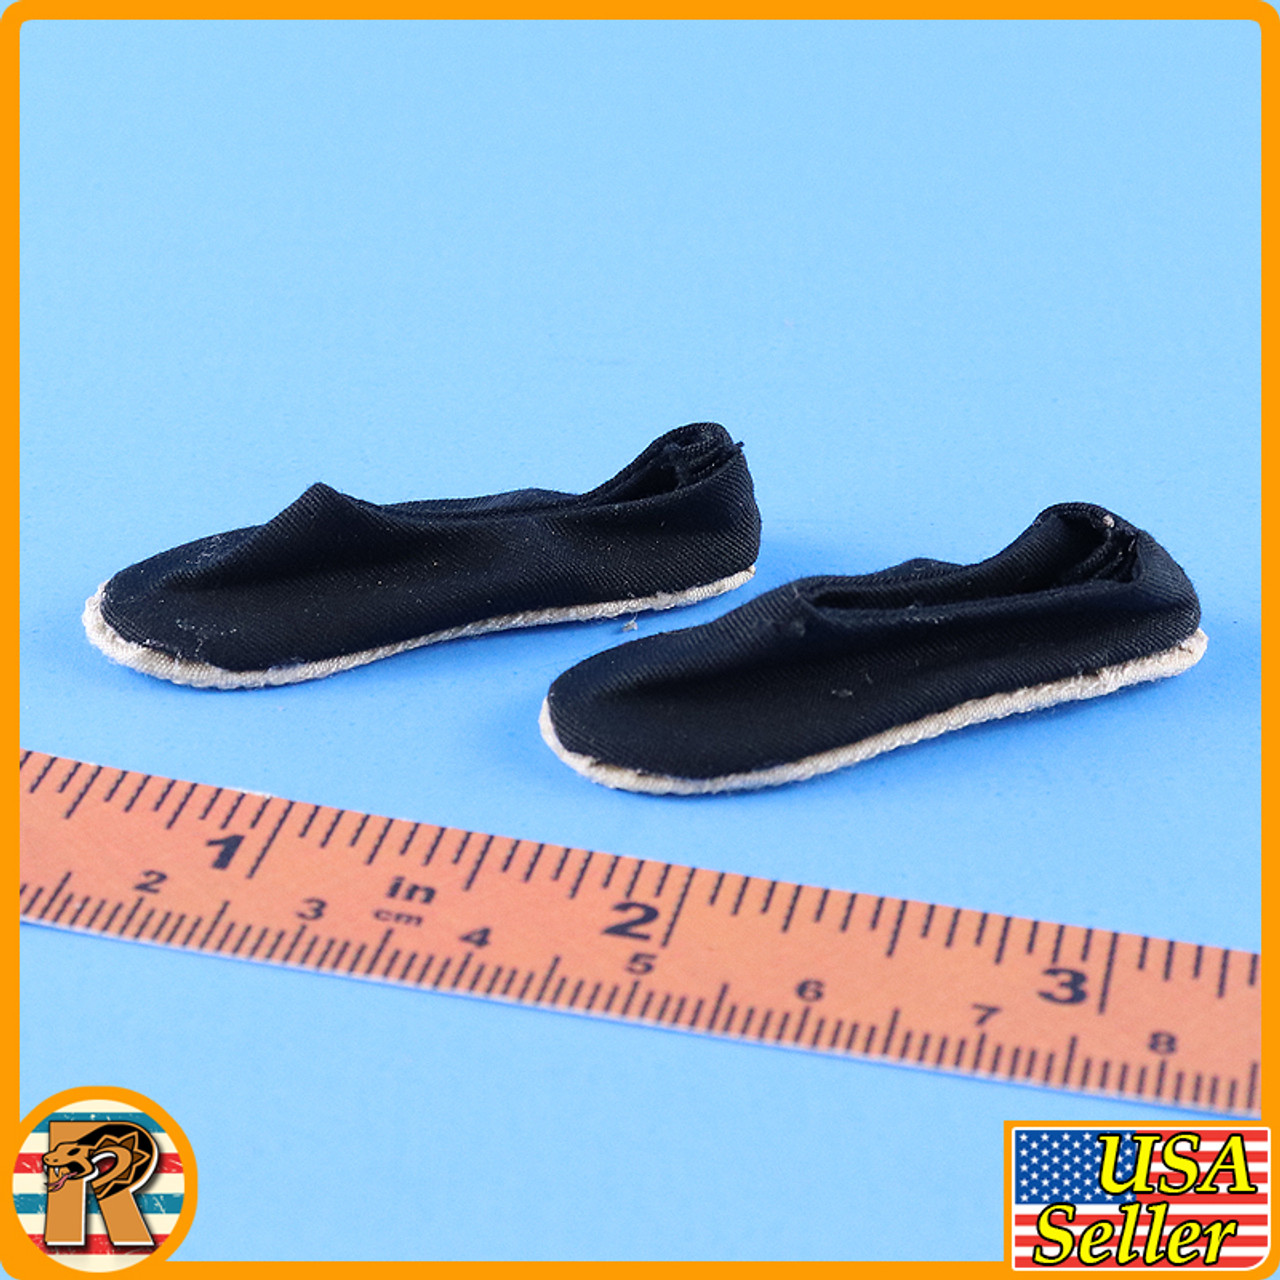 Sparks of Fire Firefly Seizure - Cloth Shoes #2 - 1/6 Scale -